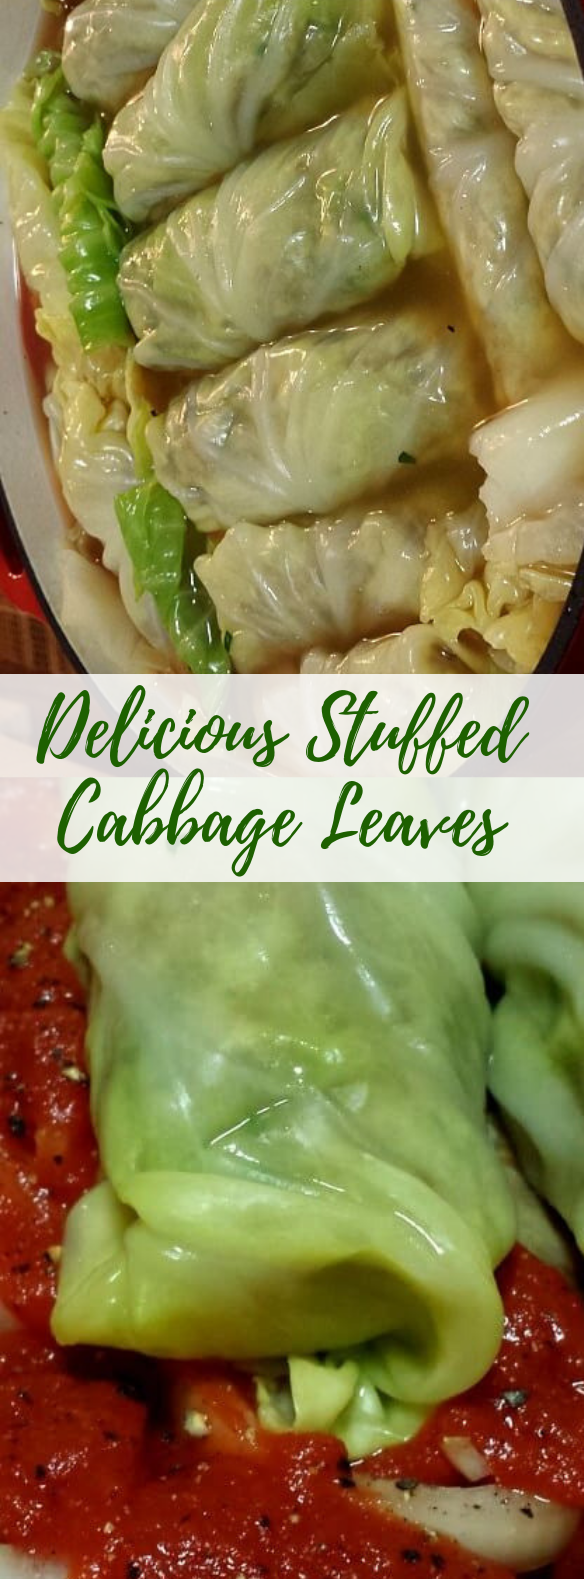 Delicious Stuffed Cabbage Leaves #veggies #healthyfood